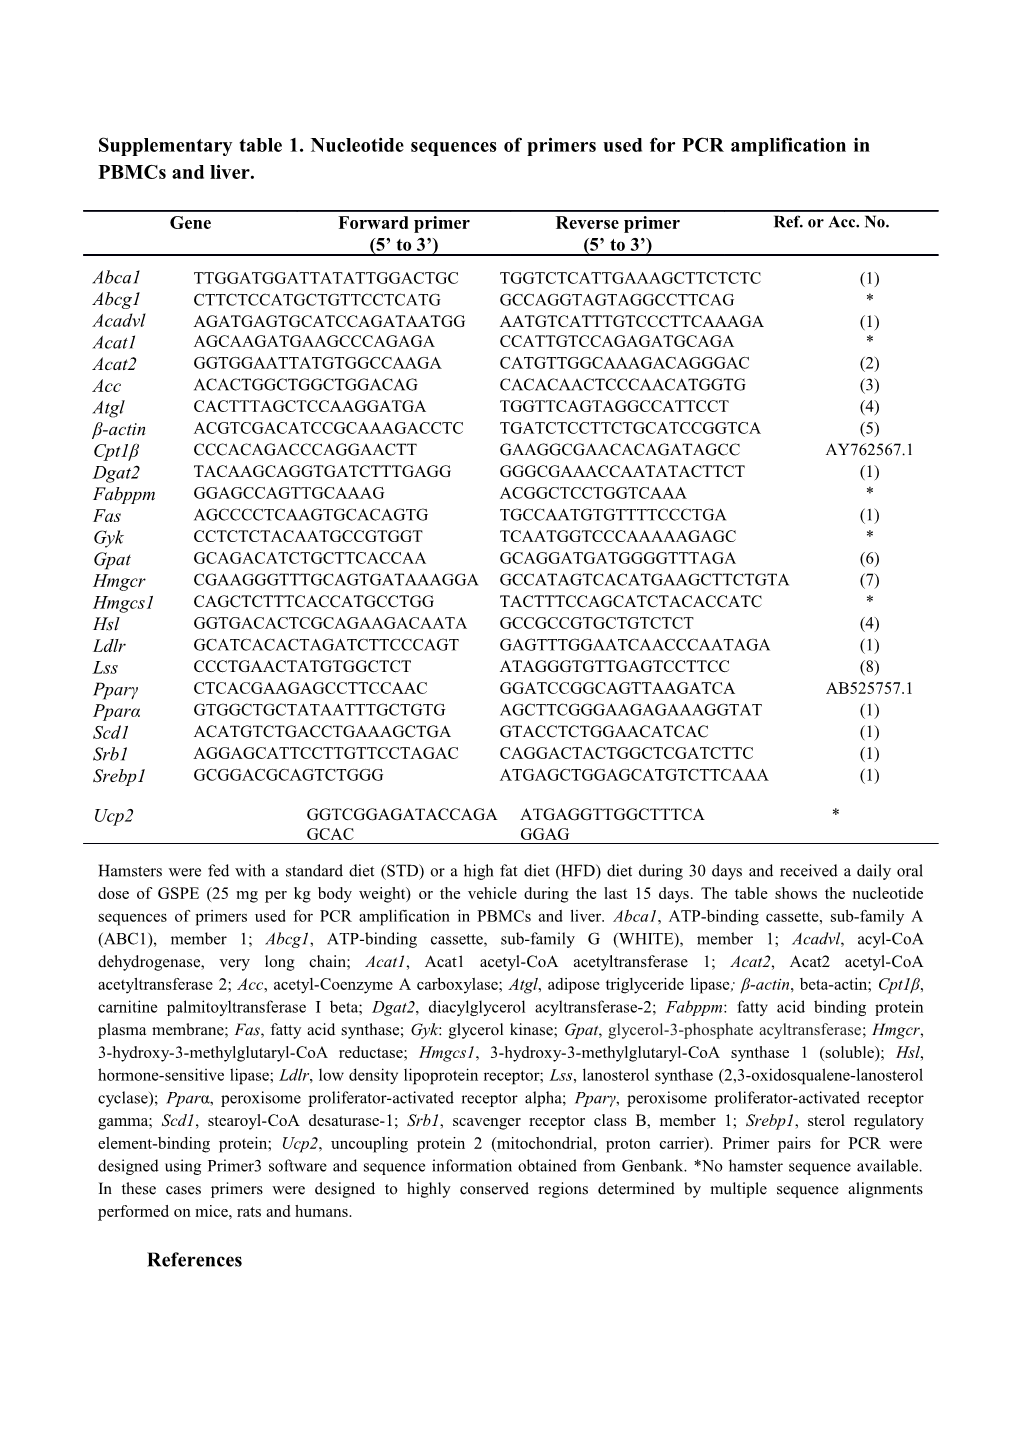 Supplementary Table 1. Nucleotide Sequences of Primers Used for PCR Amplification in Pbmcs